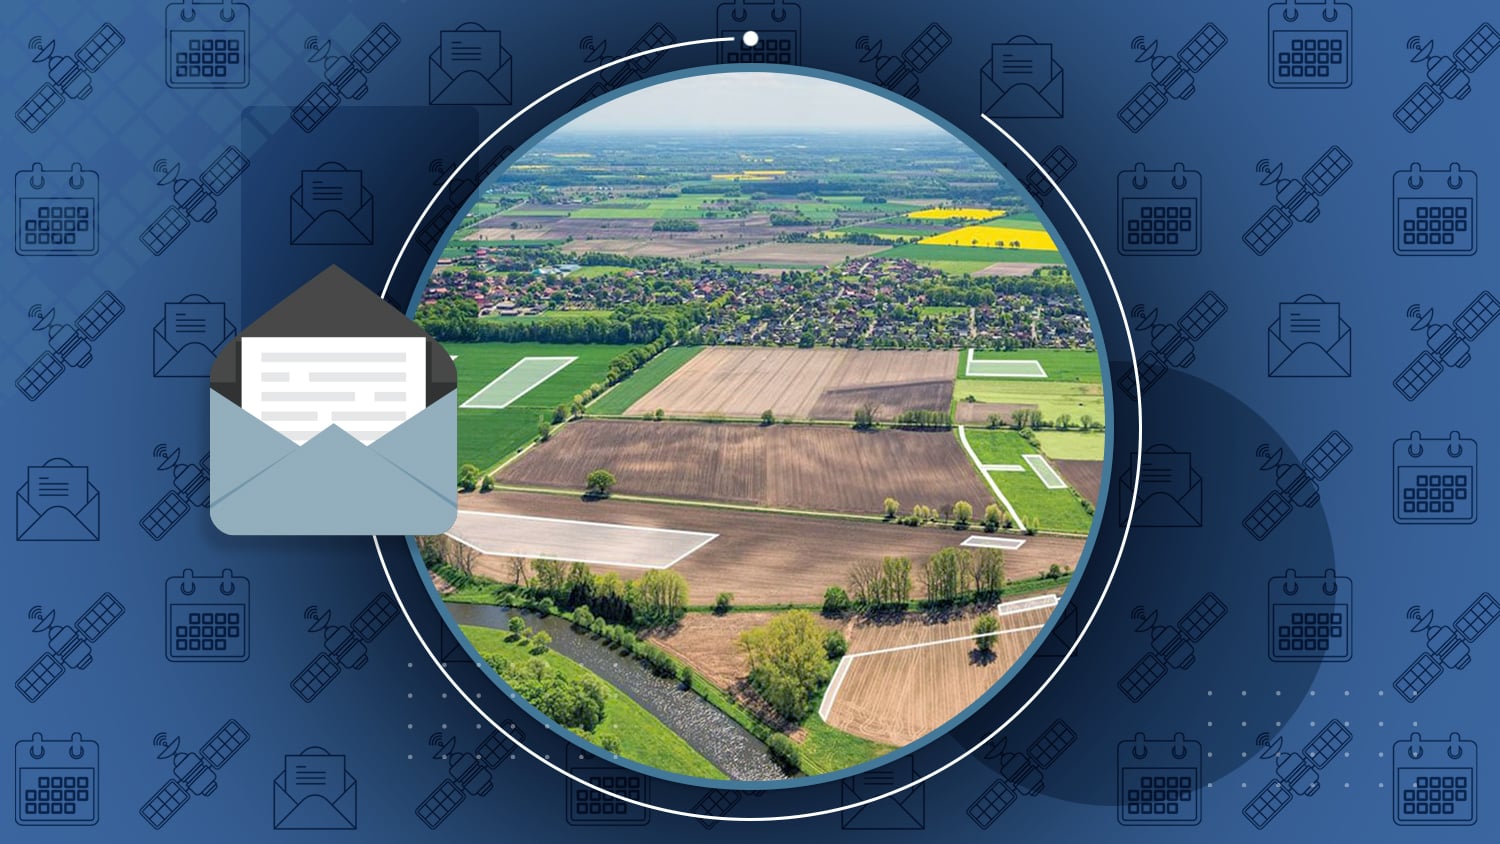 Eos Positioning Systems April 2022 Newsletter - BVVG Manages Privatization of German State-Owned Lands with ArcGIS Enterprise and High-Accuracy Mobile GIS